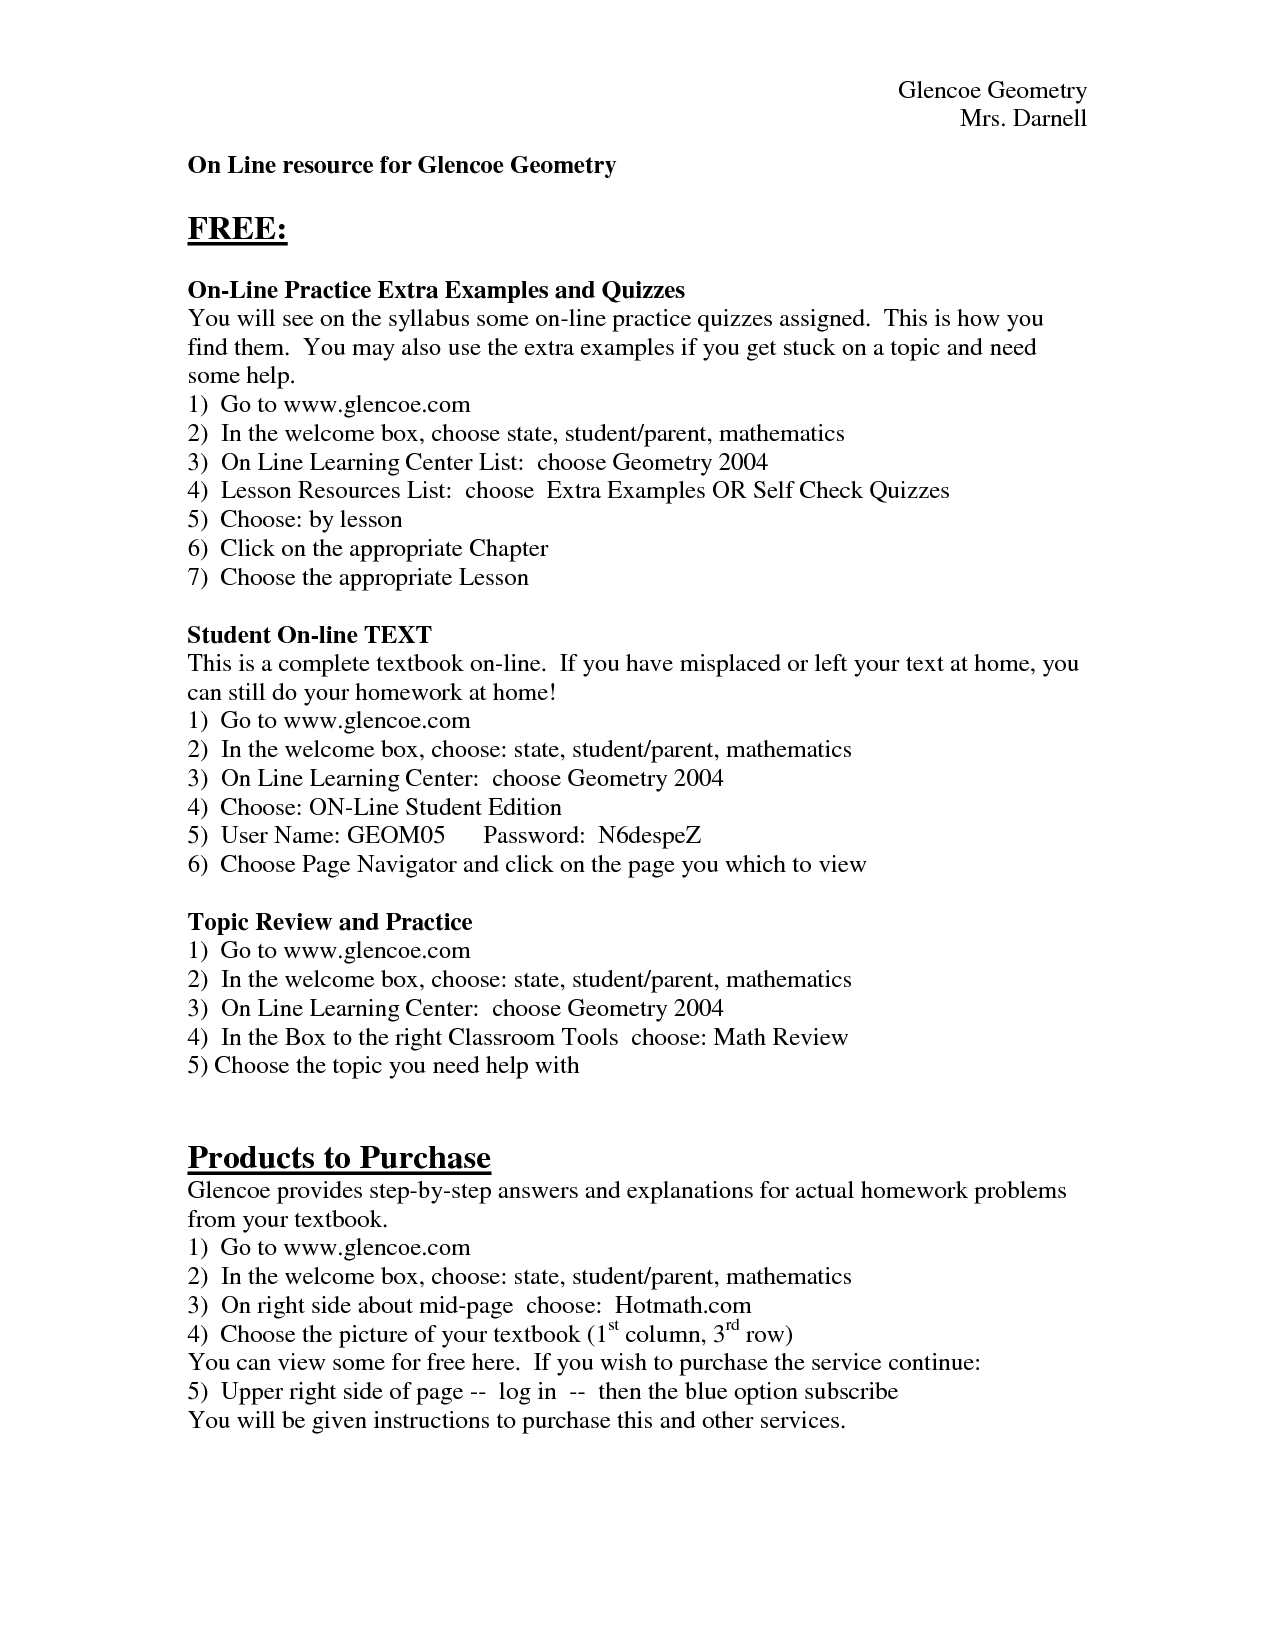 16-glencoe-mcgraw-hill-science-grade-7-worksheets-answers-free-reading-comprehension